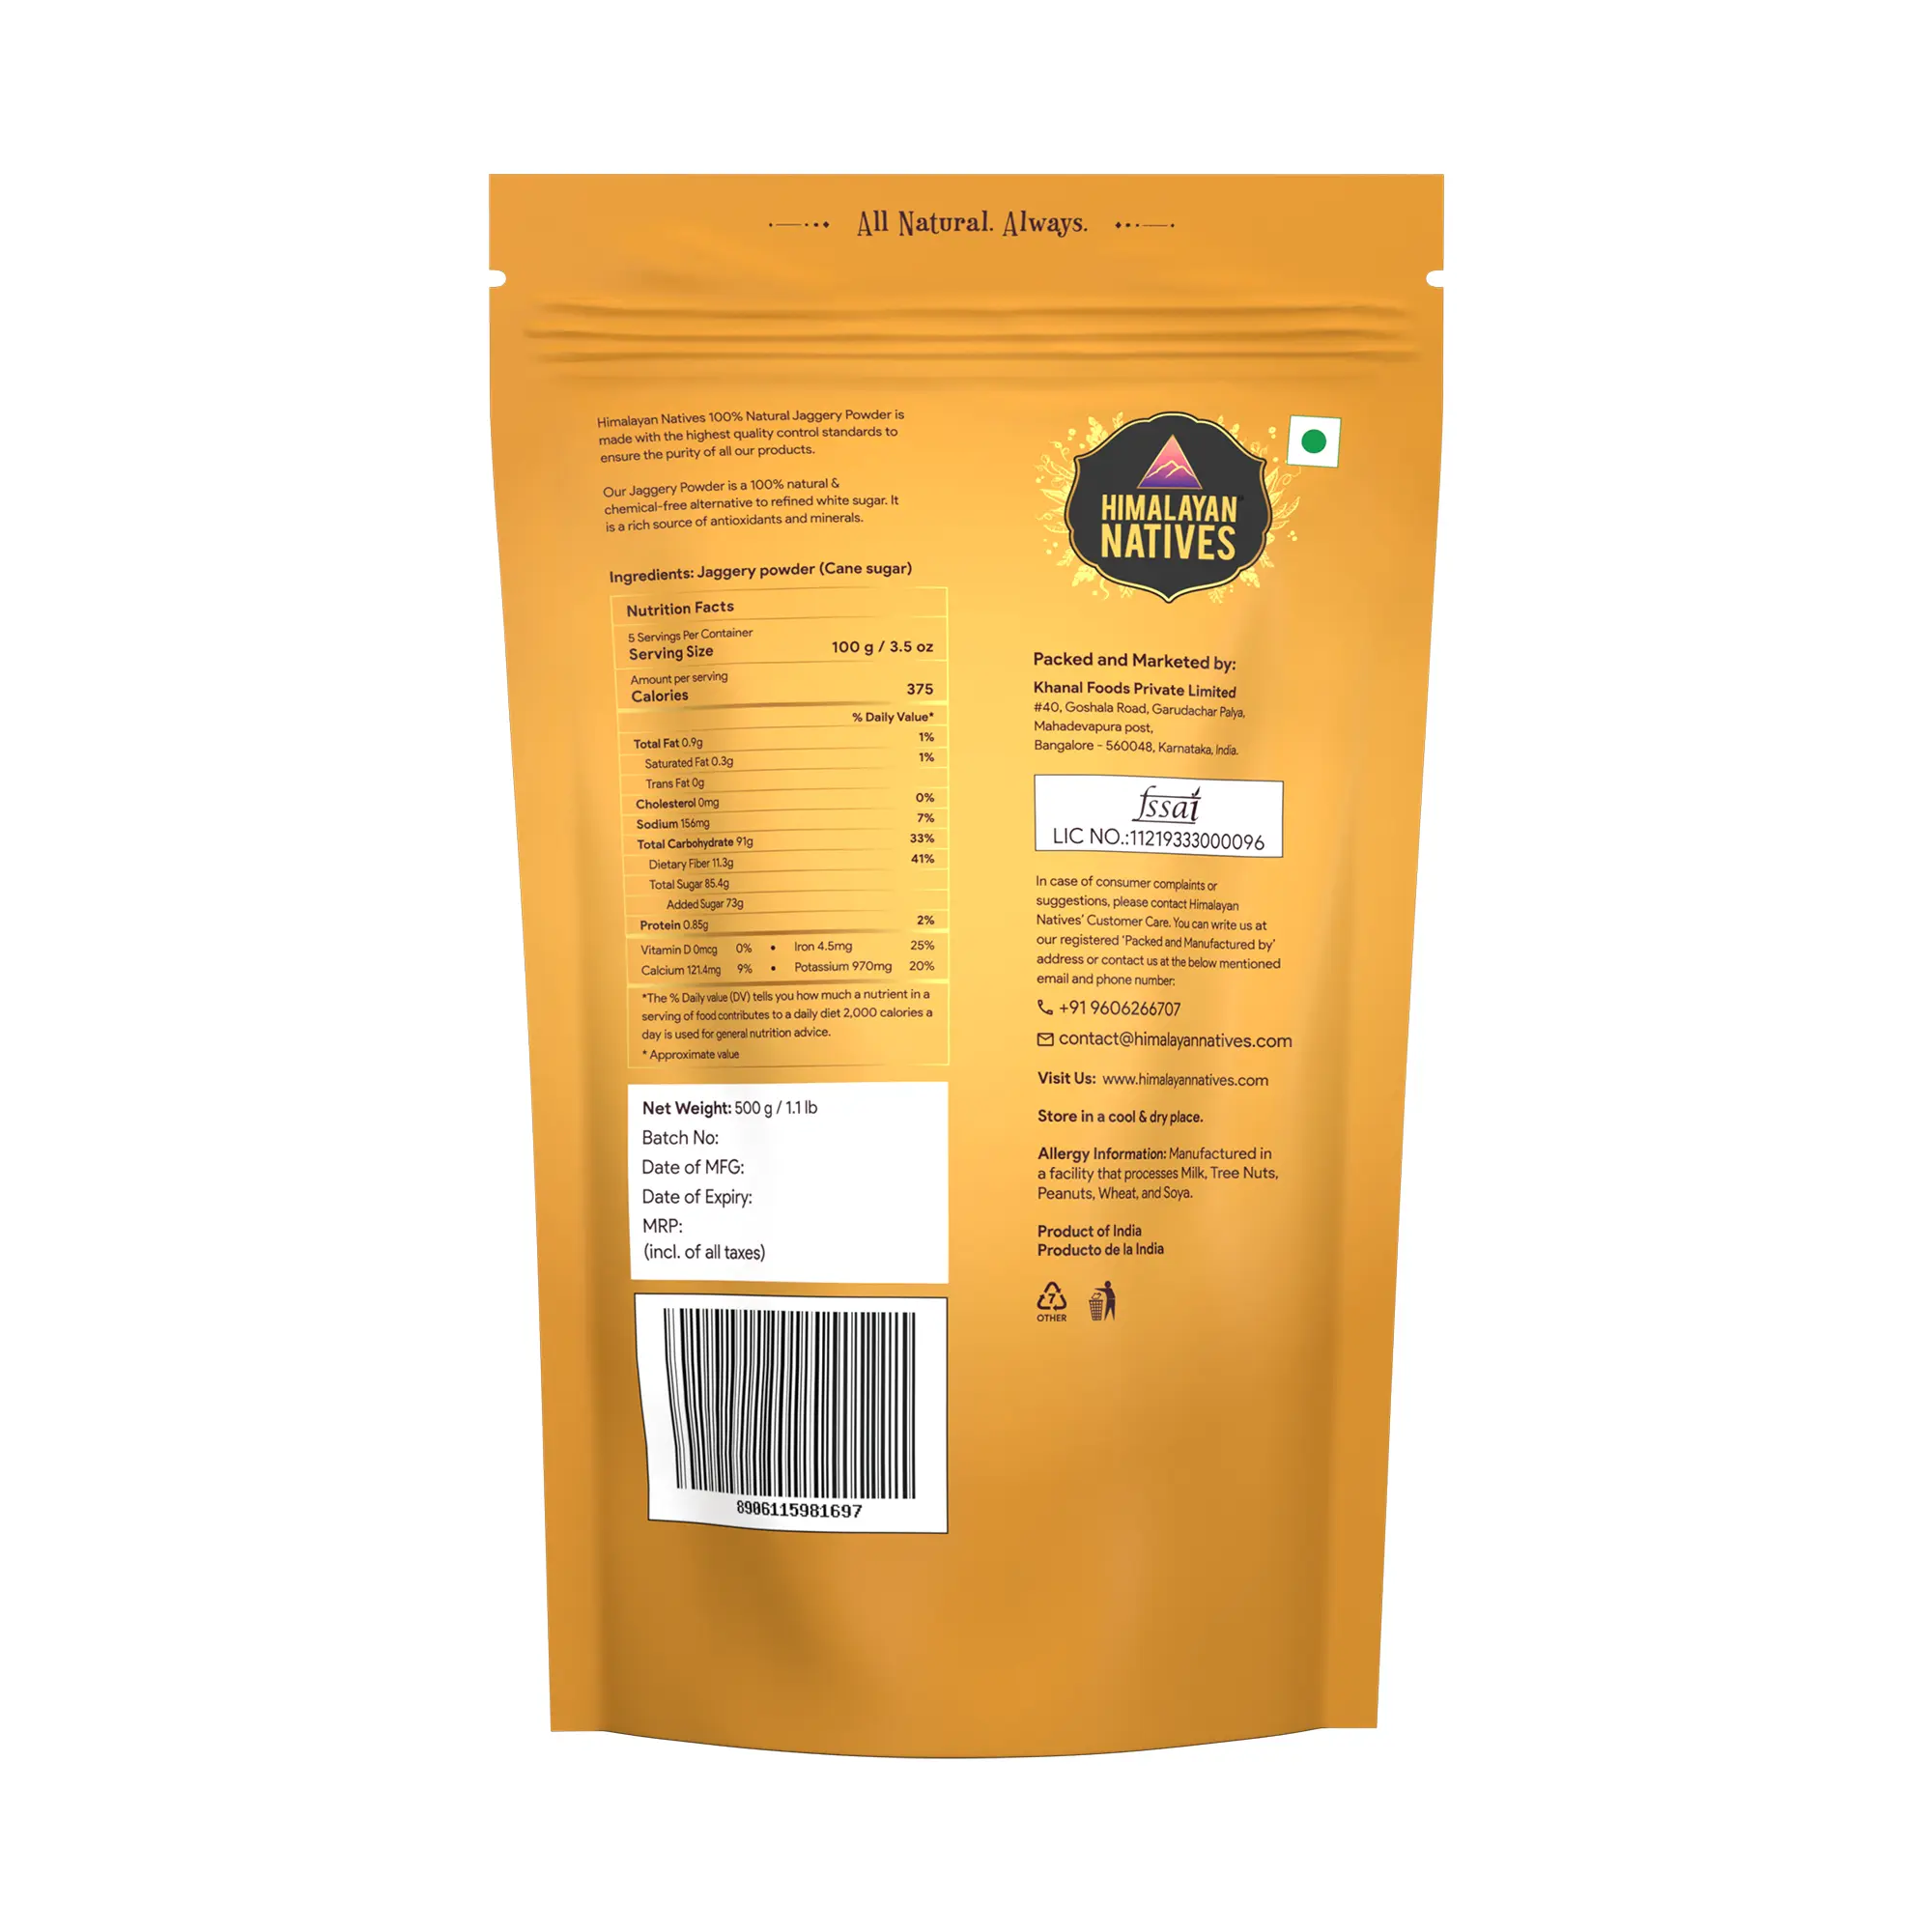 Product Specification - Jaggery Powder